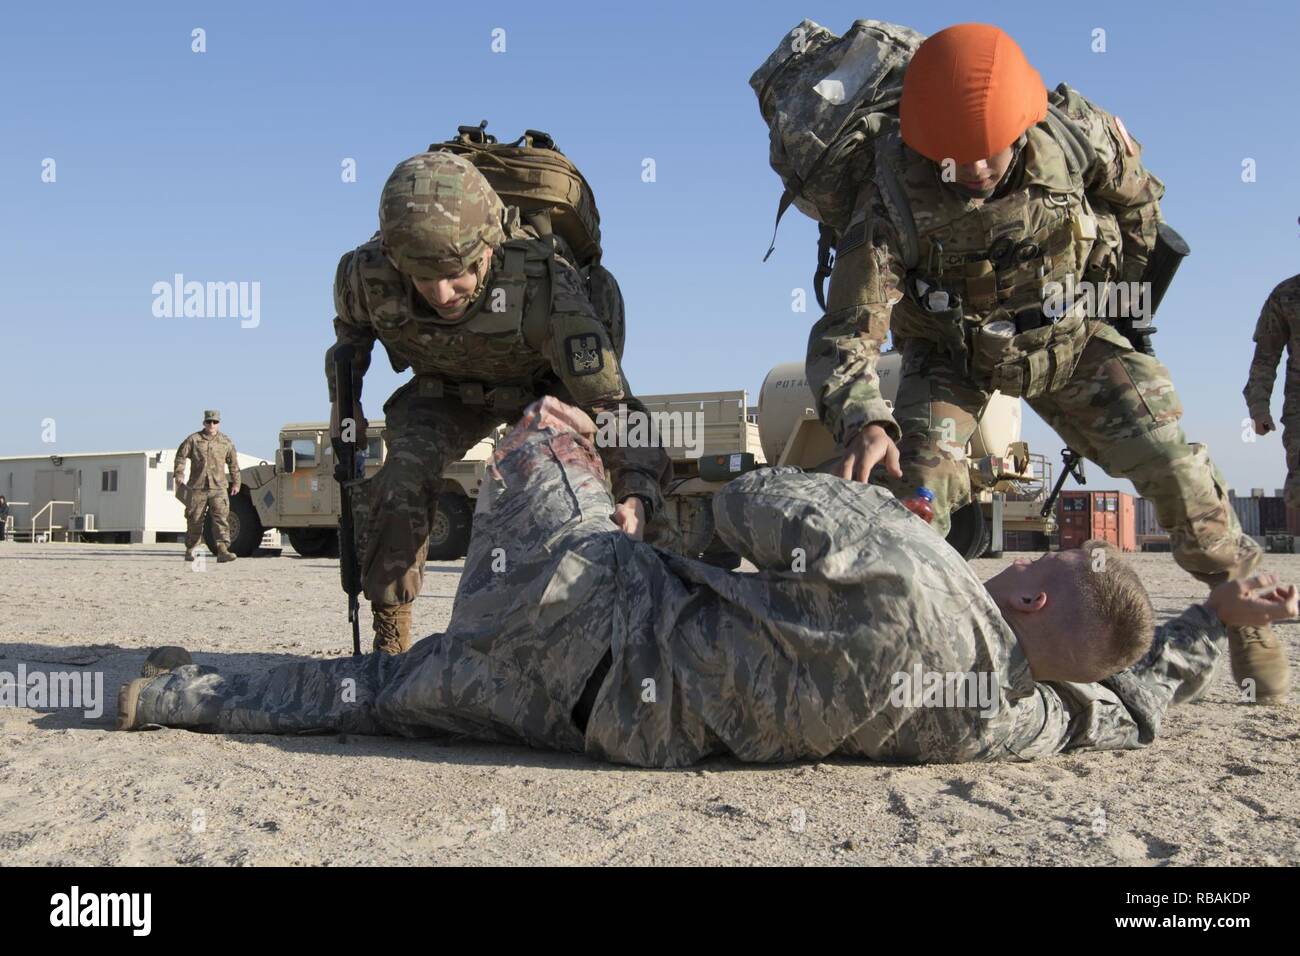 U.S. Army combat medics Sgt. Michael B. Drozd, assigned to the 719th Medical Detachment Veterinary Services, left, and Sgt. Neal W. Cypriano, assigned to task Force Sinai, right, rush to treat a simulated casualty during a medical training scenario, Dec. 23, 2018, Camp Arifjan, Kuwait. U.S. Army Central combat medic Soldiers conduct regular training to maintain a high level of combat readiness and proficiency. Stock Photo